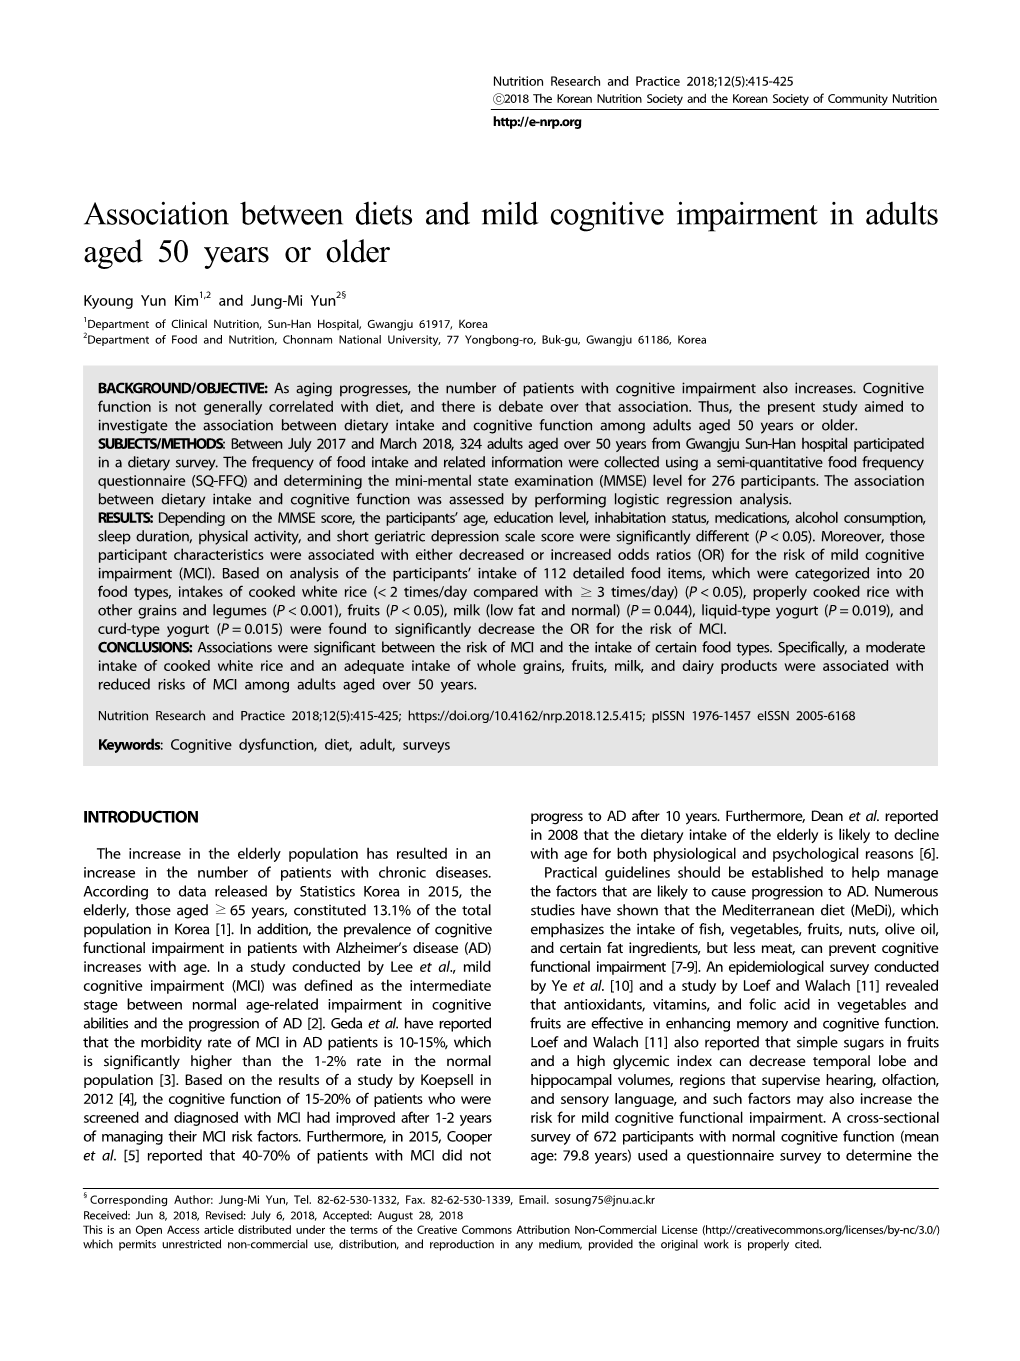 Association Between Diets and Mild Cognitive Impairment in Adults Aged 50 Years Or Older